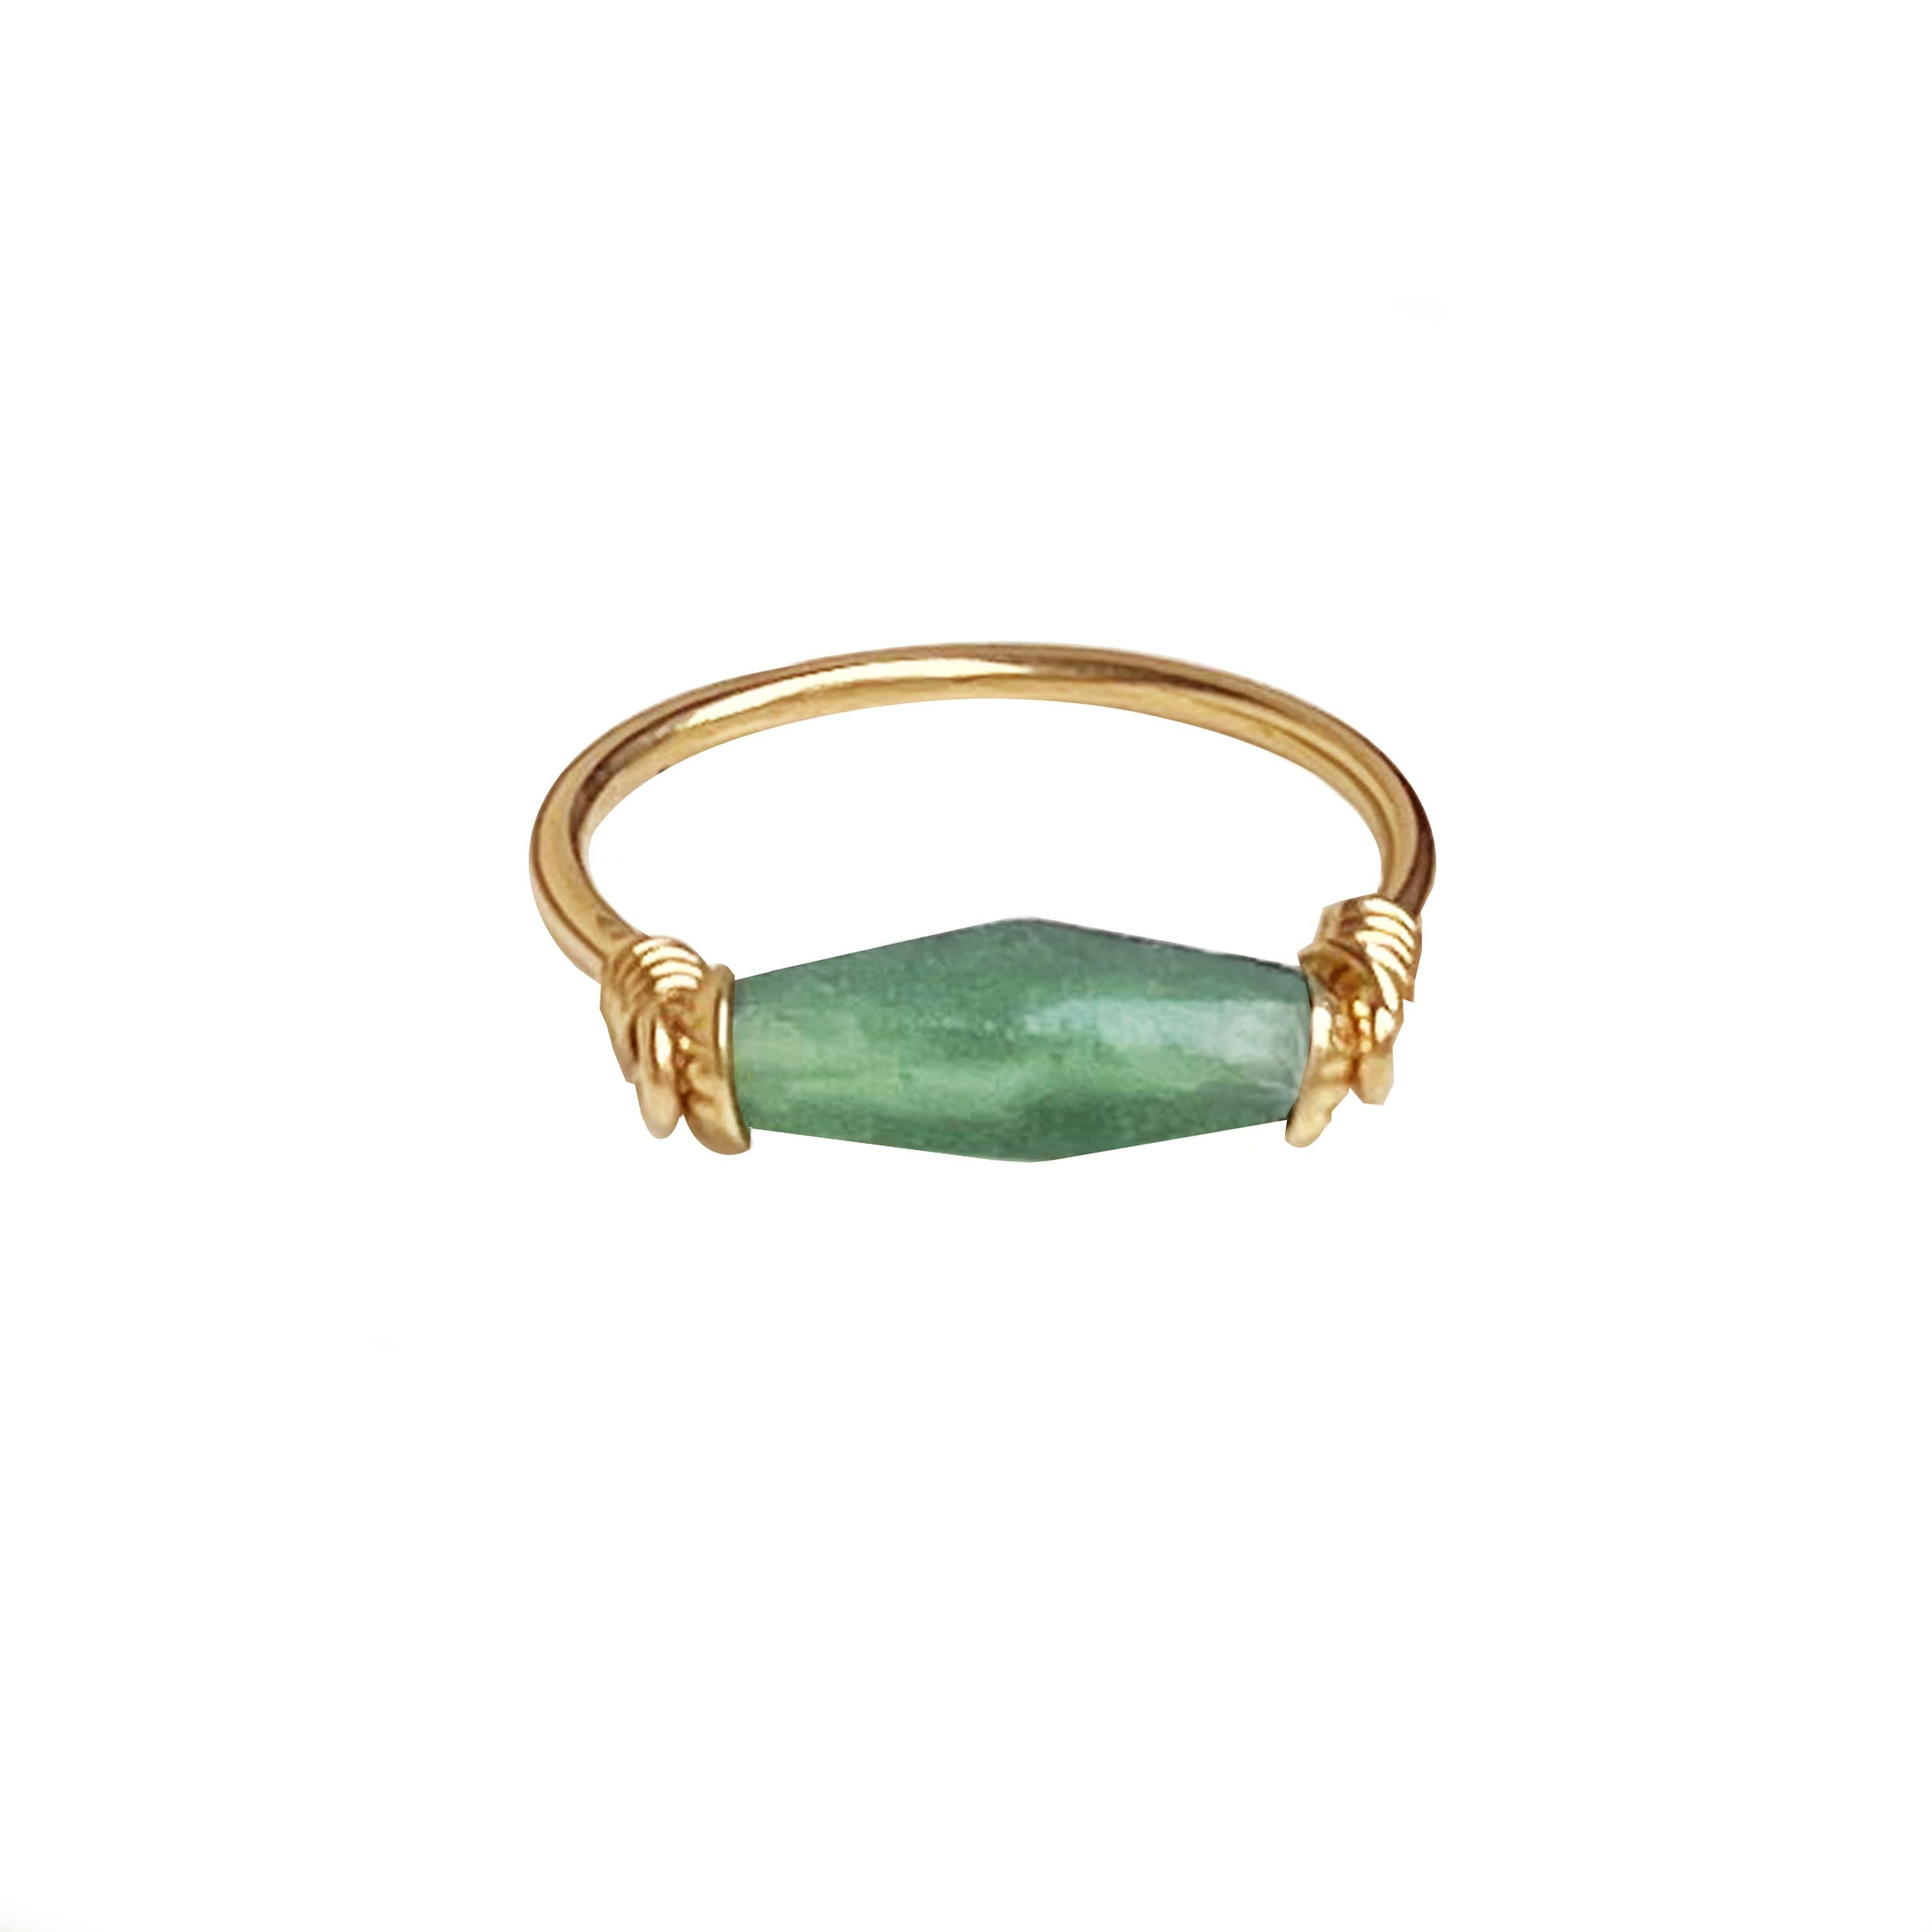 In this 18 Kt gold ring, a cylindrical Roman glass has been mounted ( 1st Century AD ) 

The production of Roman Glass can be traced back all the beginning of the 1st century AD. Initially, Roman Glass was produced and created using ancient